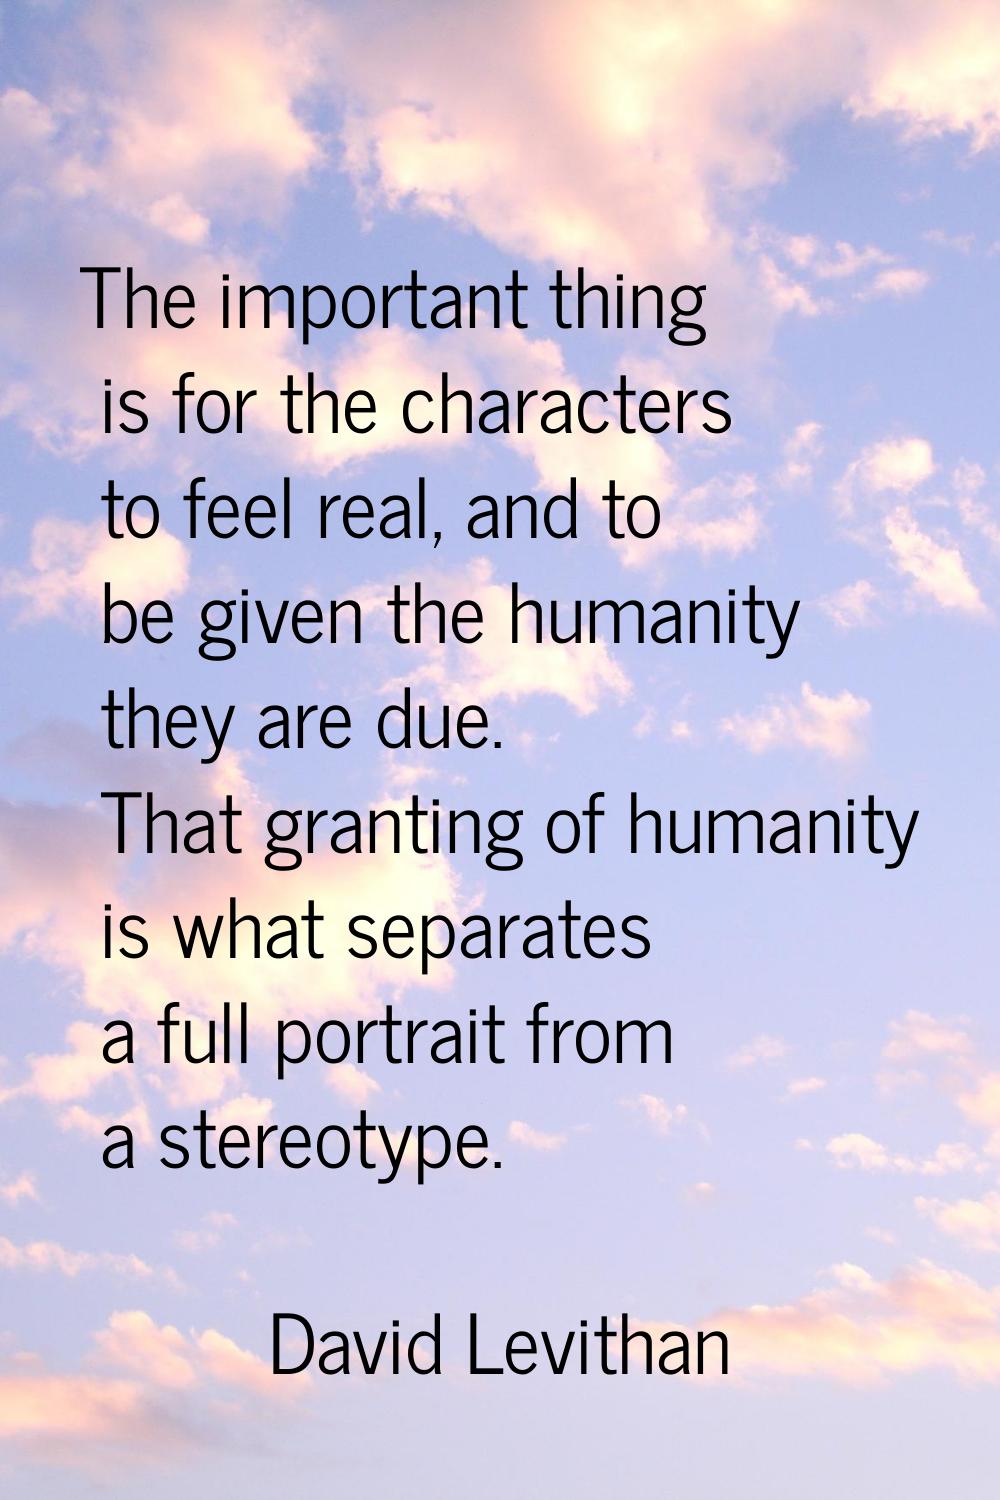 The important thing is for the characters to feel real, and to be given the humanity they are due. 